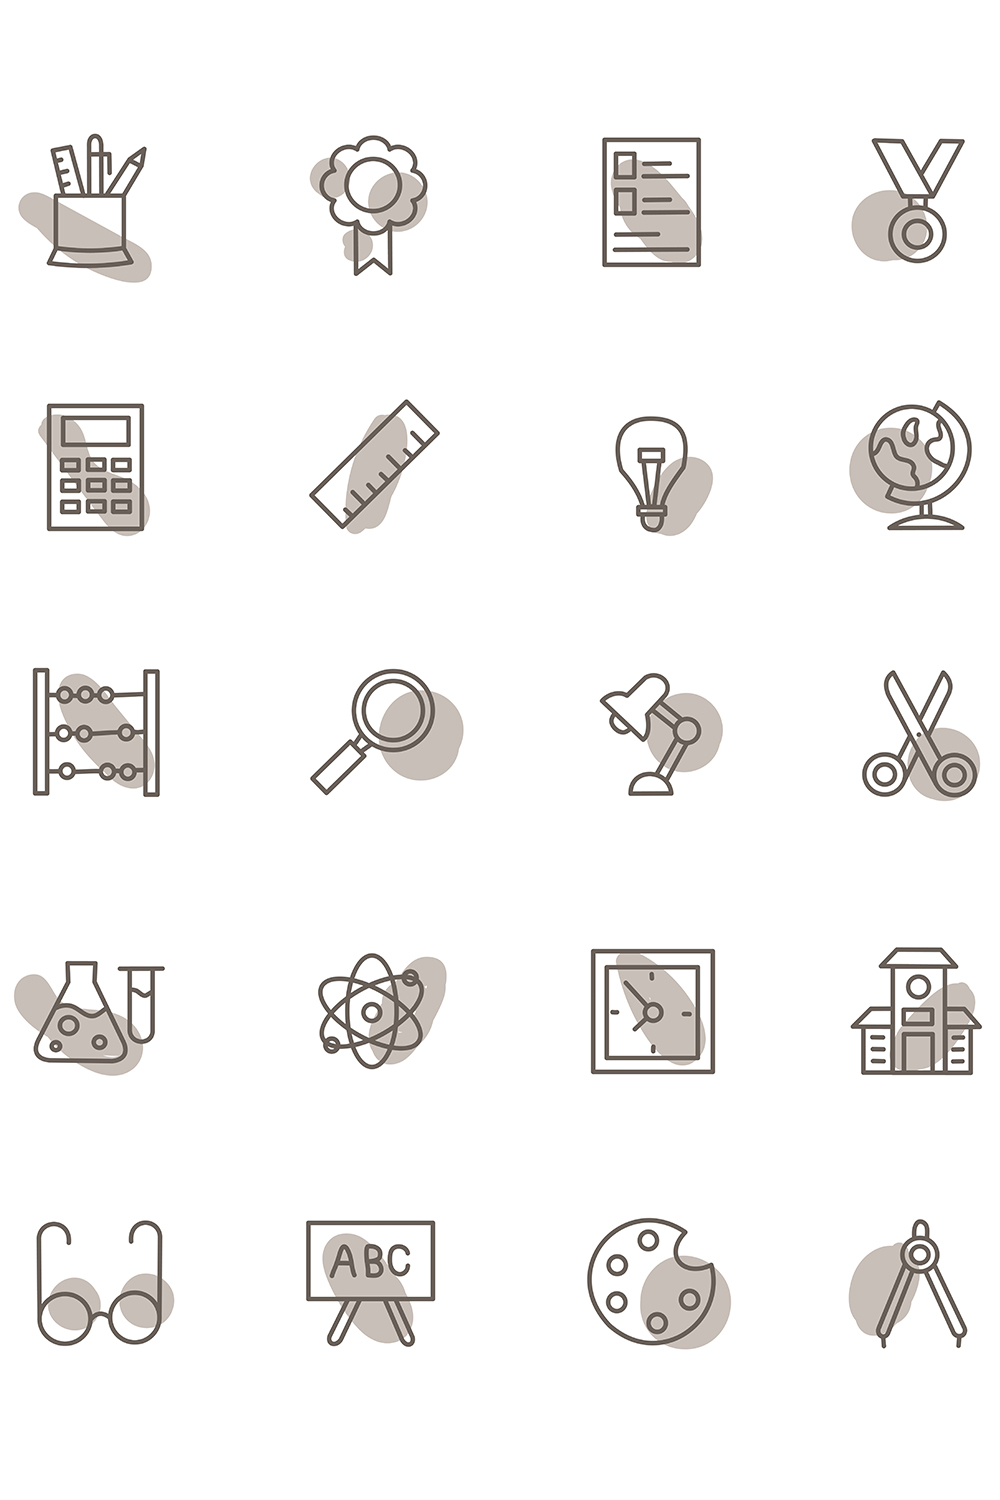 Bunch of different icons on a white background.